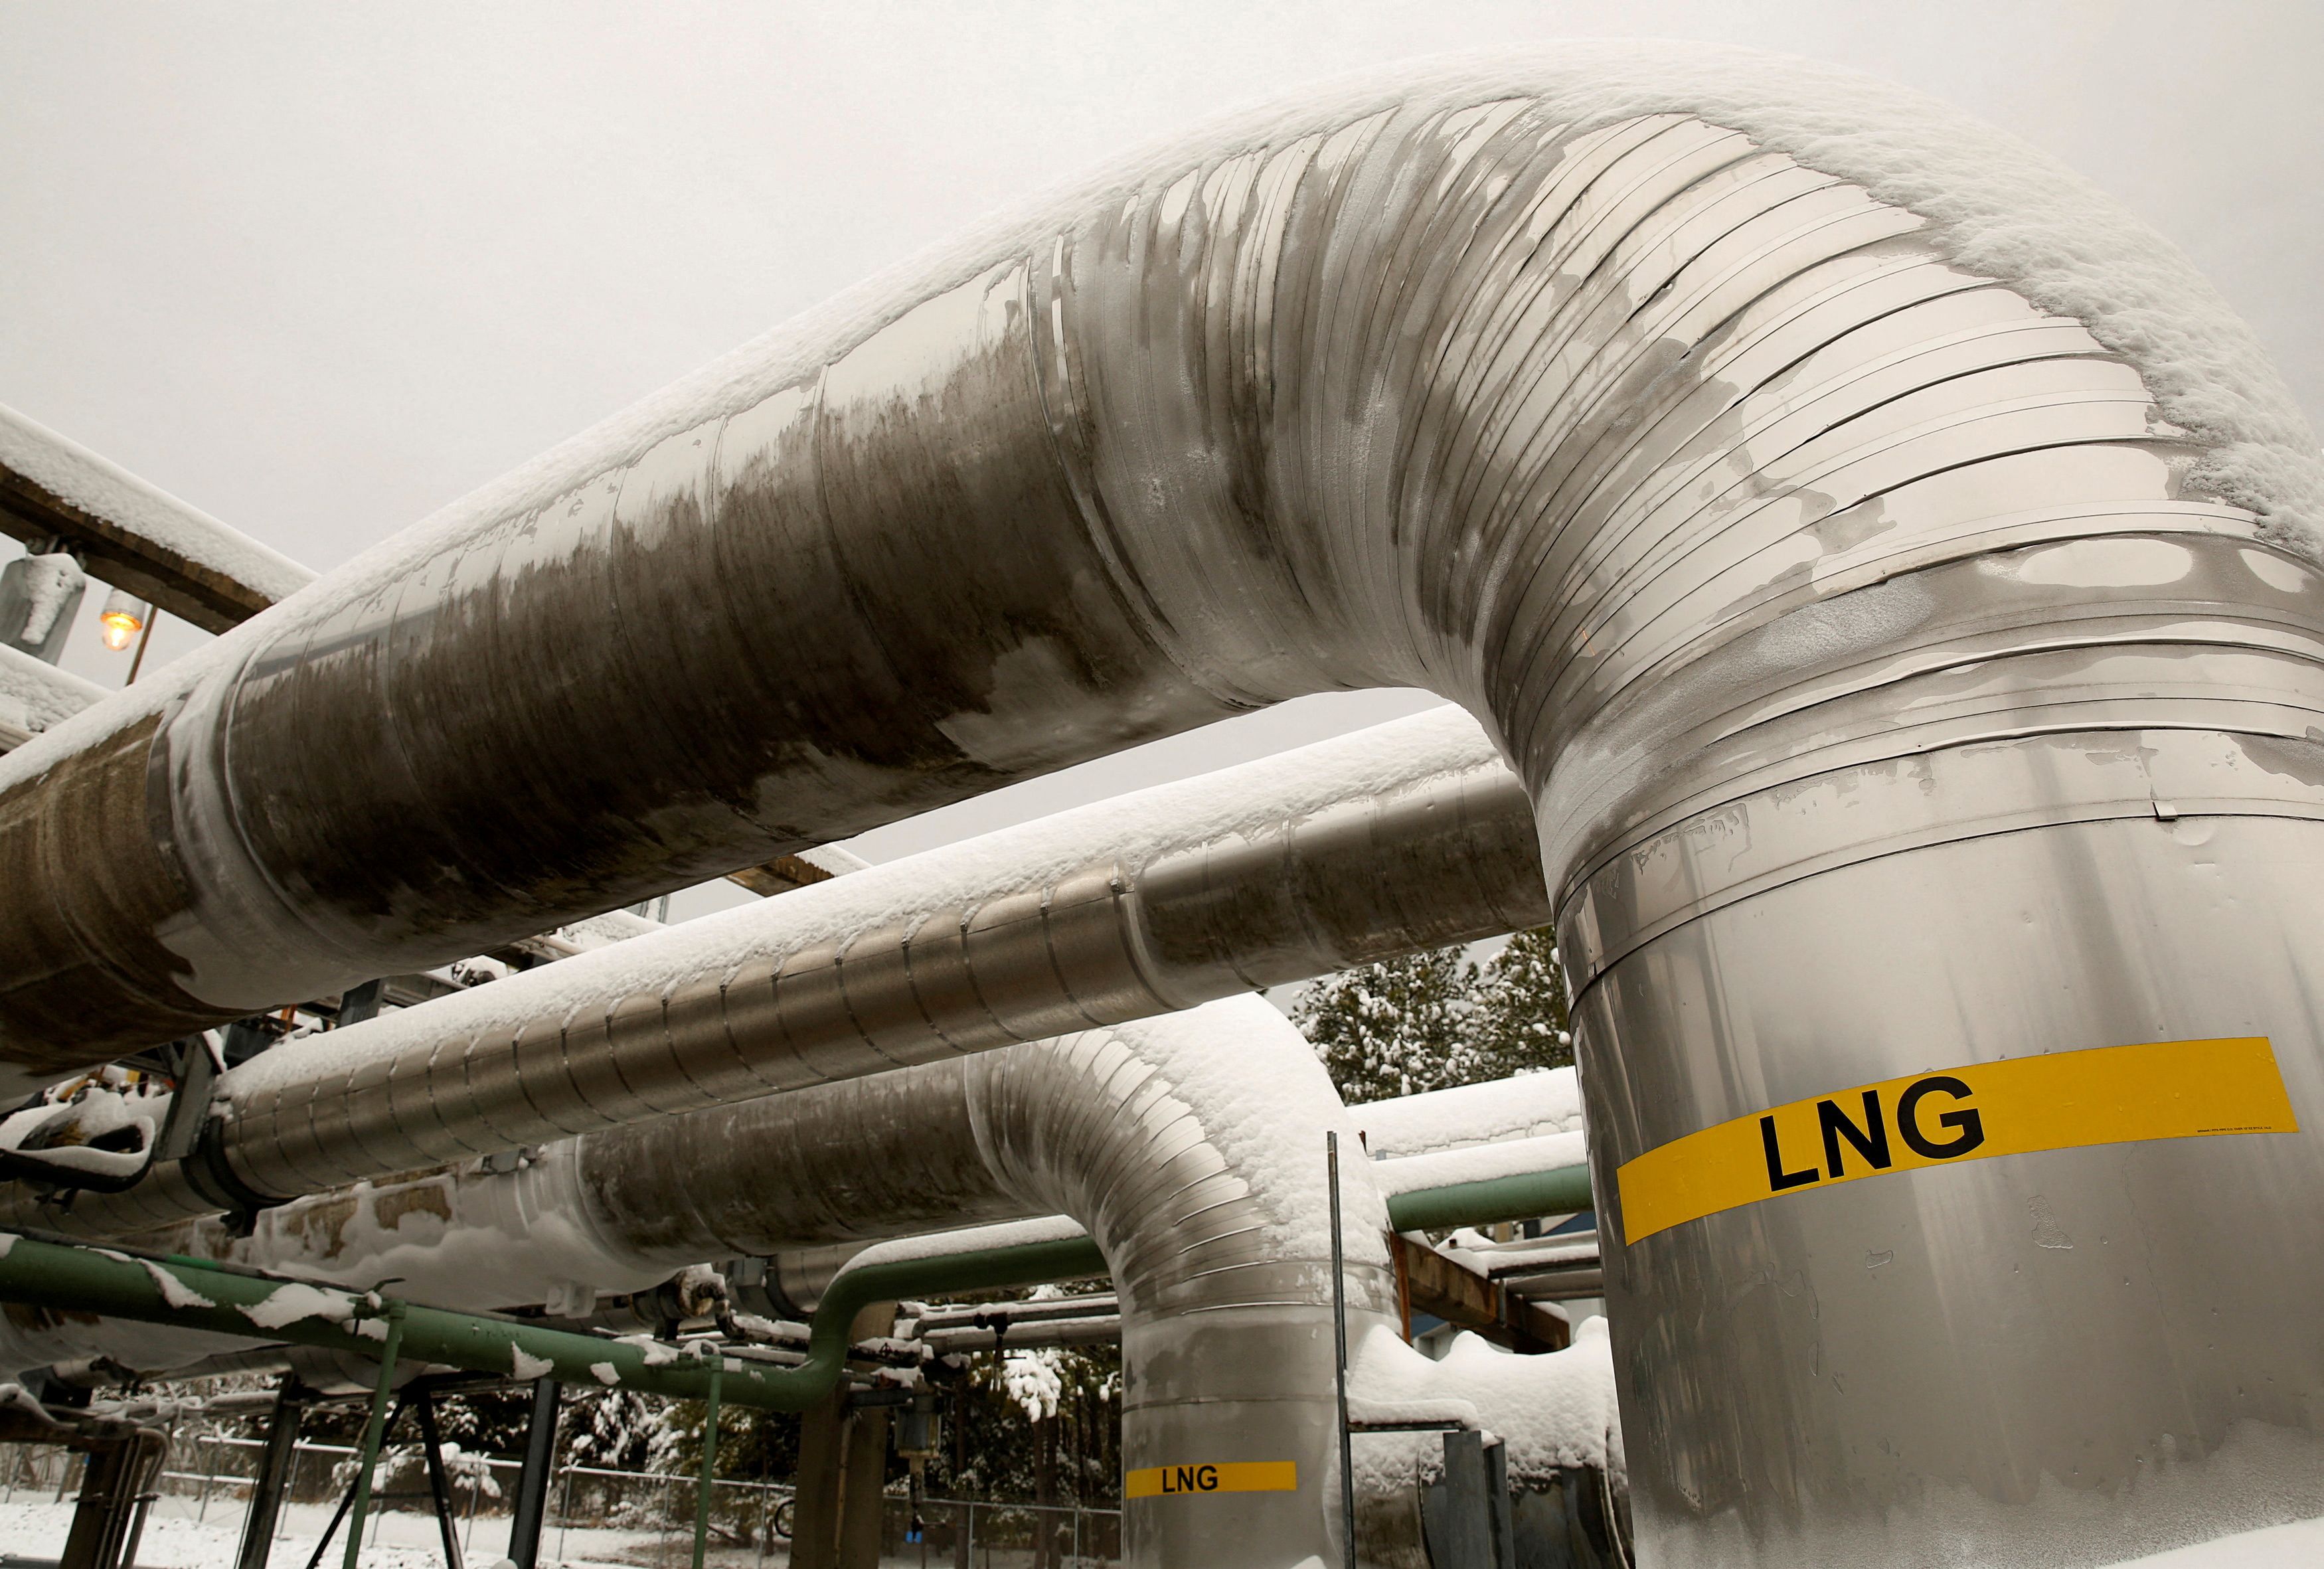 Snow-covered transfer lines are seen at the Dominion Cove Point Liquefied Natural Gas terminal in Maryland